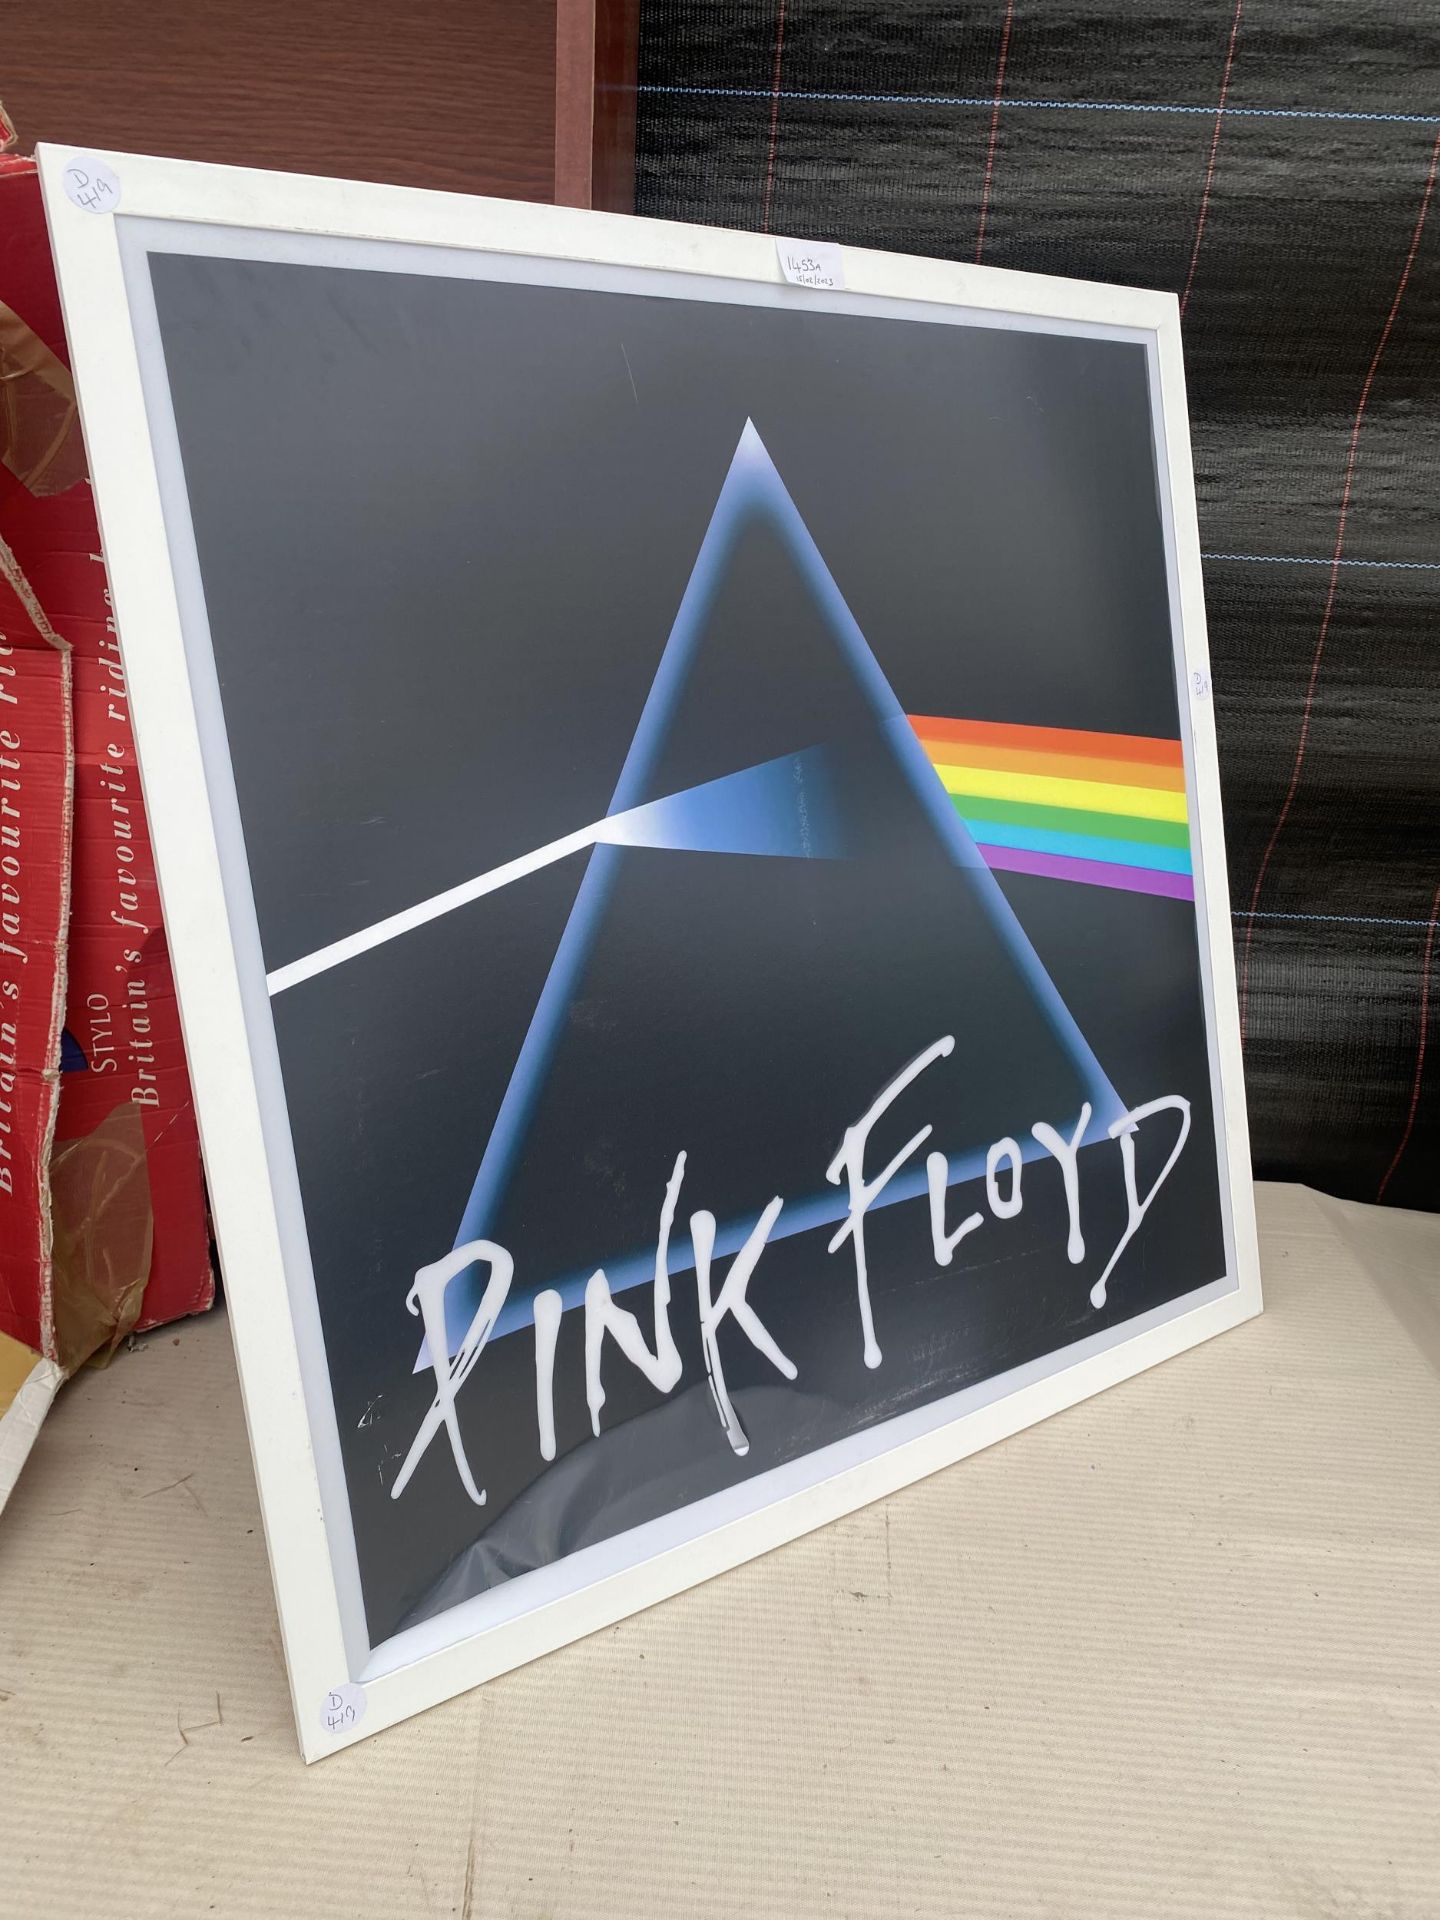 AN ILLUMINATED PINK FLOYD SIGN LACKING ADAPTER AND PLUG